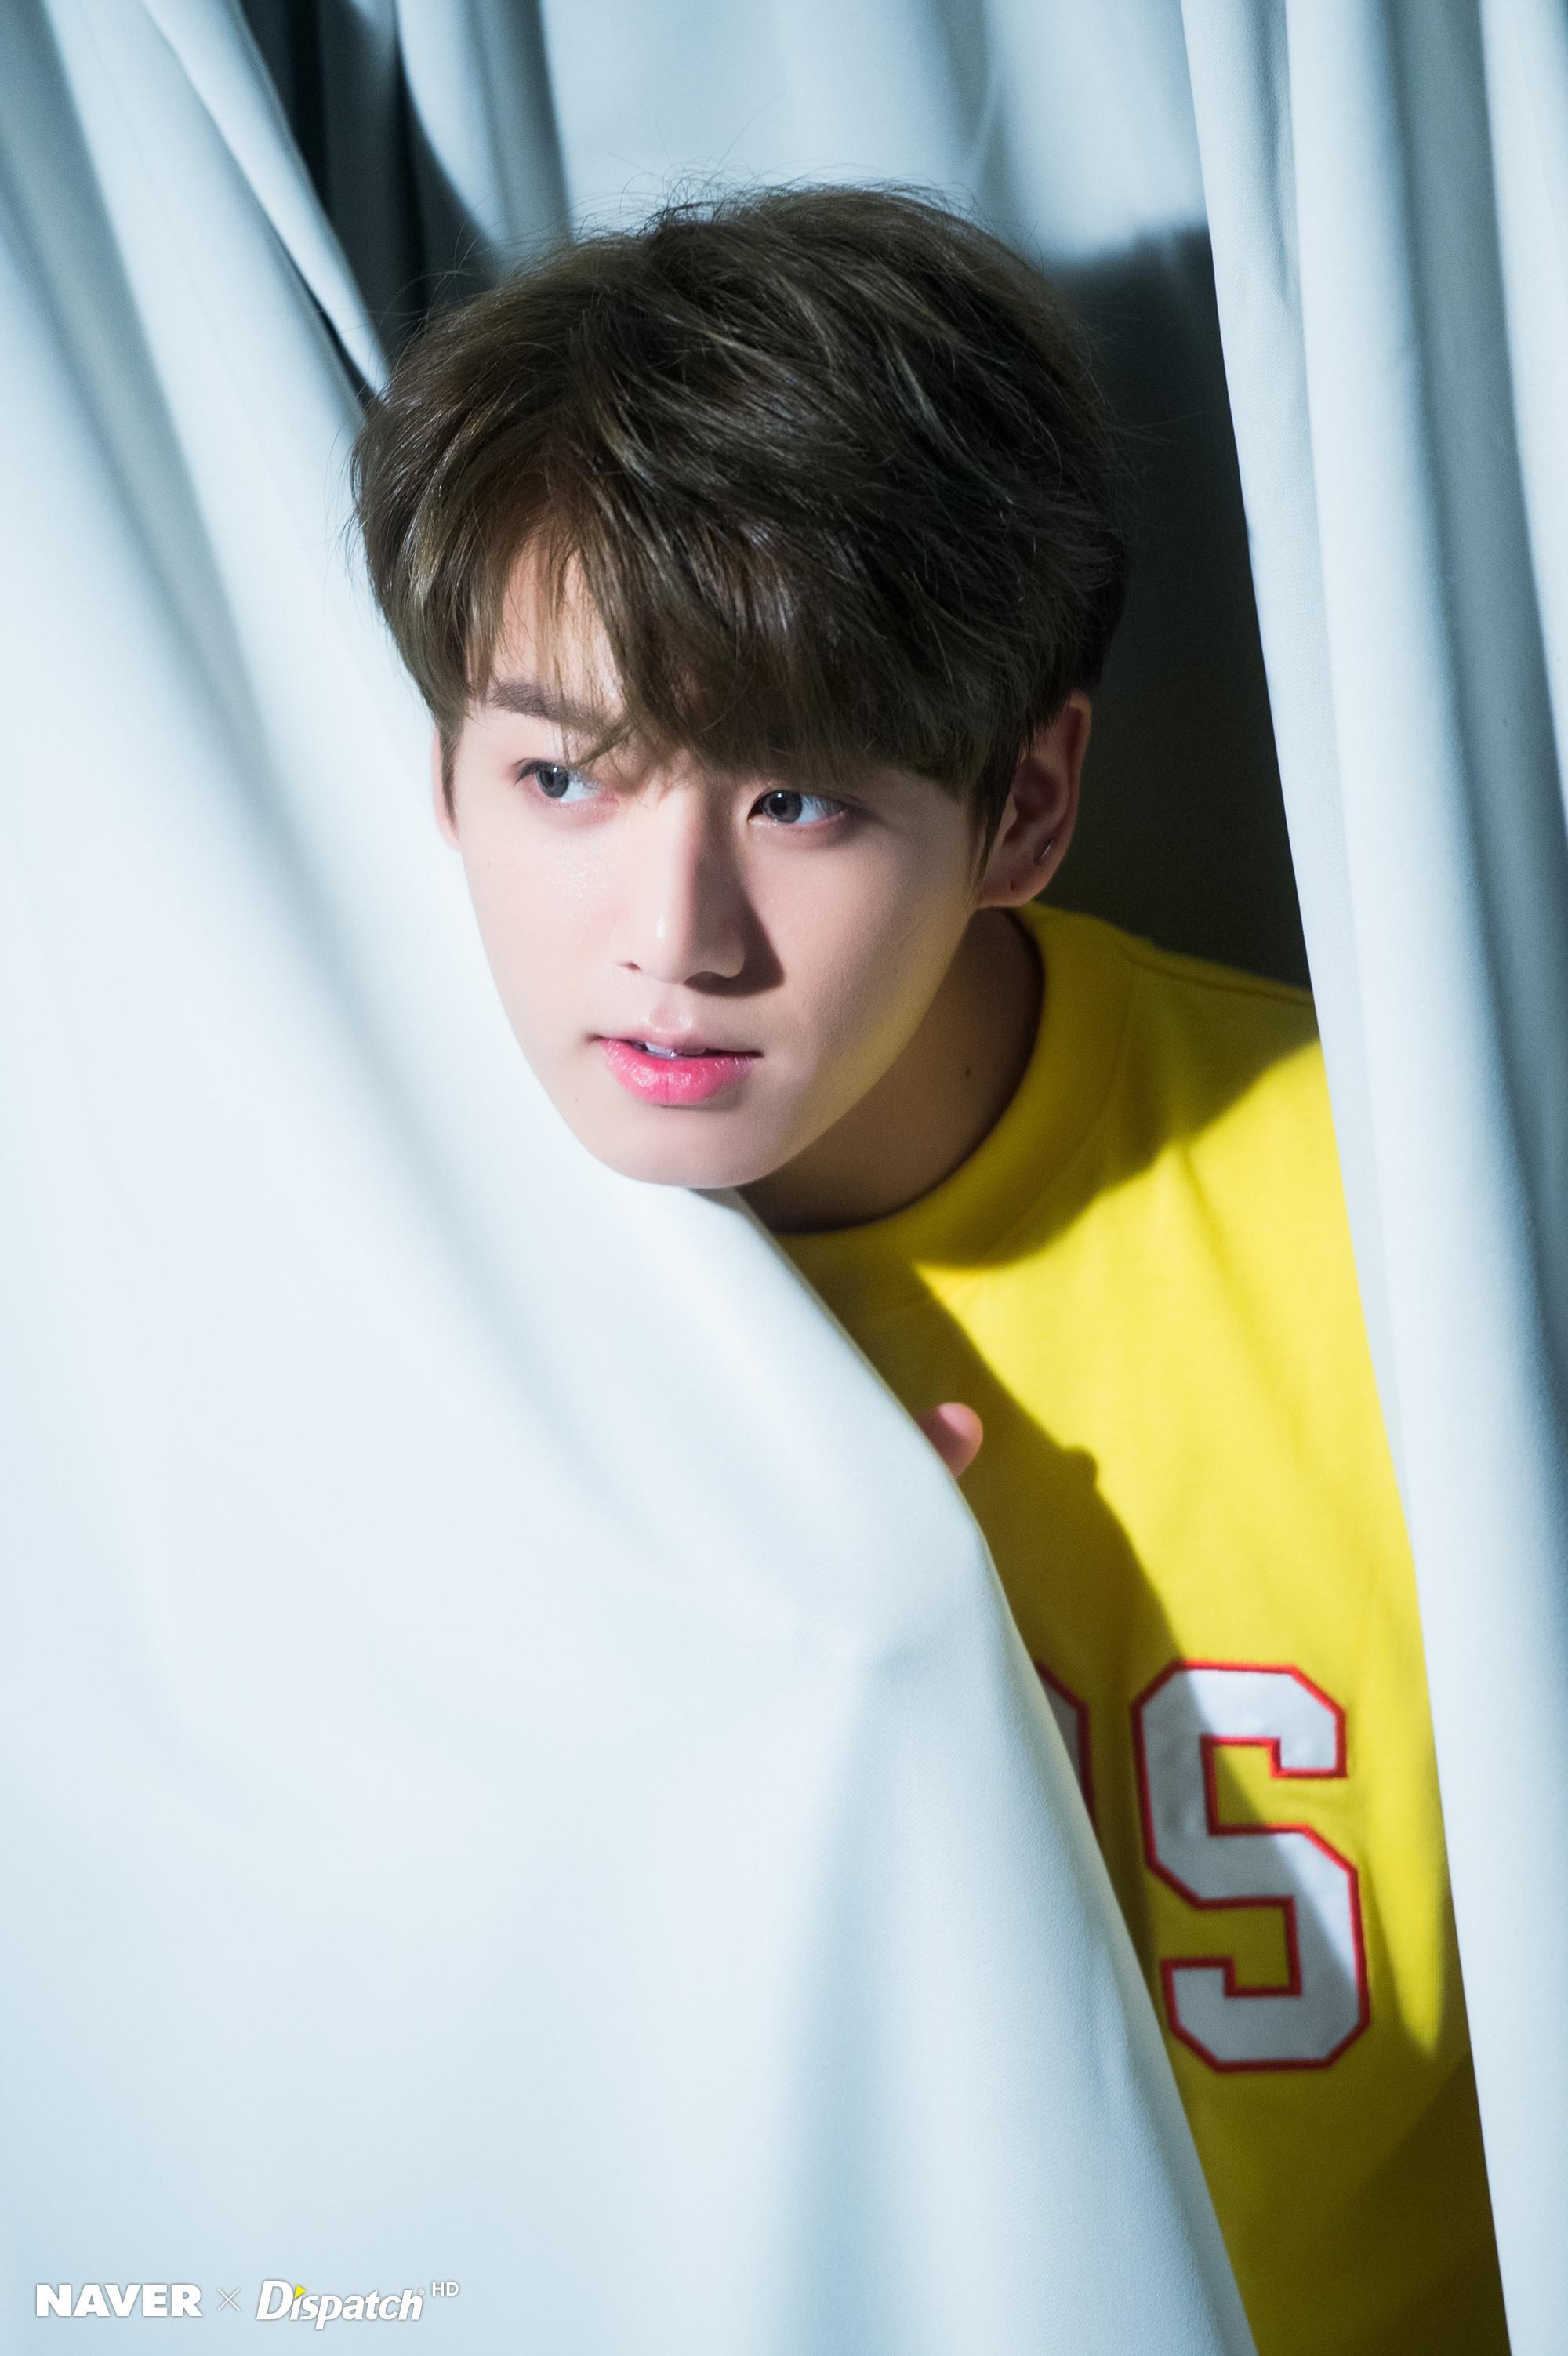 Dispatch Dropped the Rest of Exclusive HD Behind Photo of Jungkook